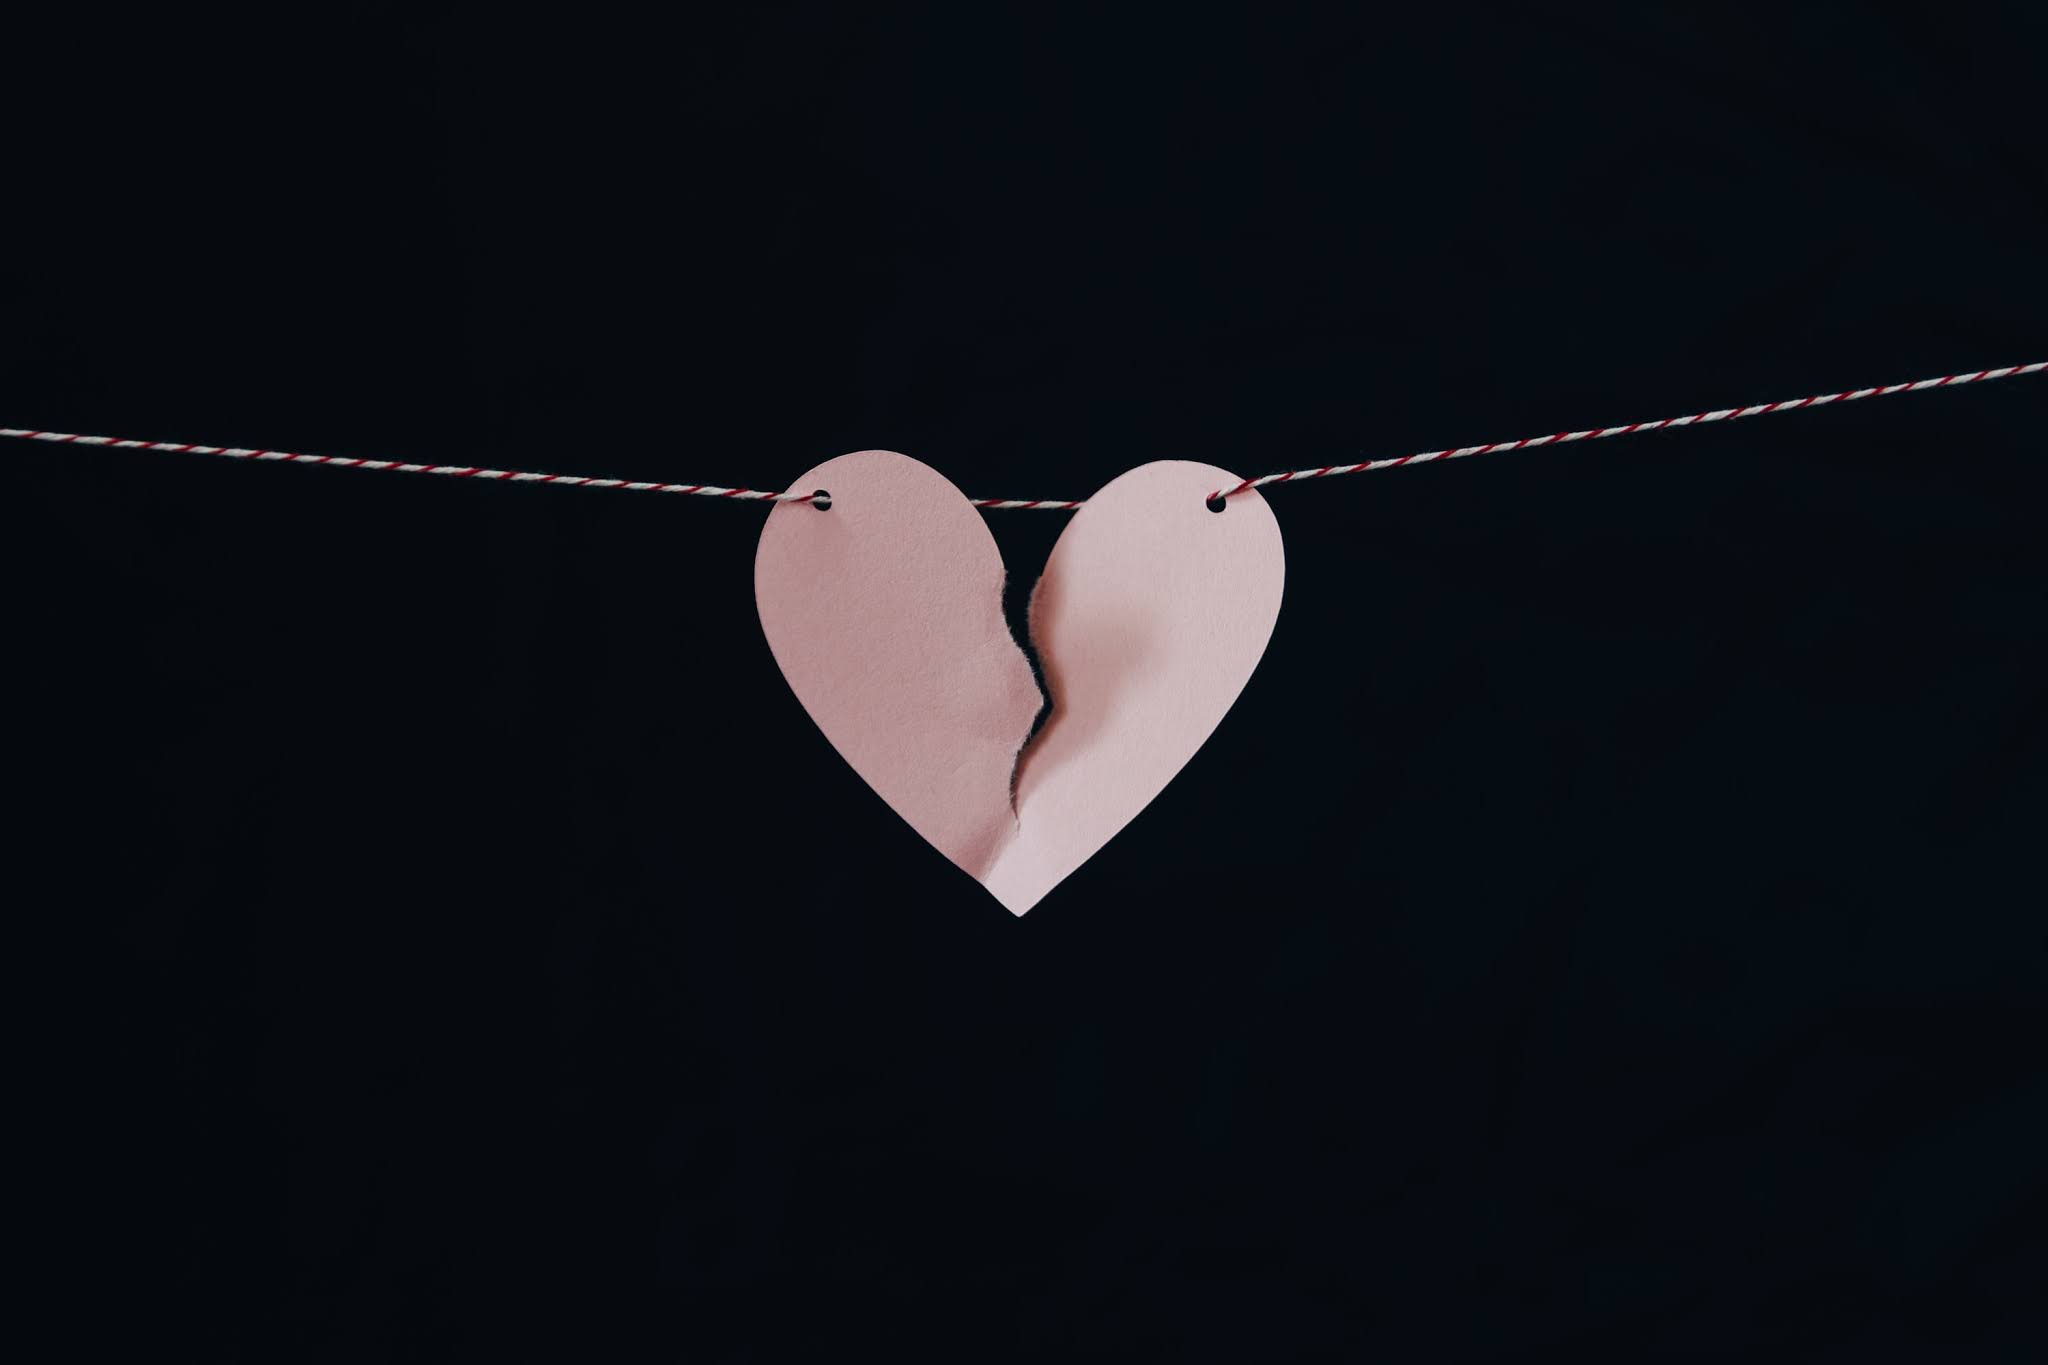 A paper heart on a string ripped in two